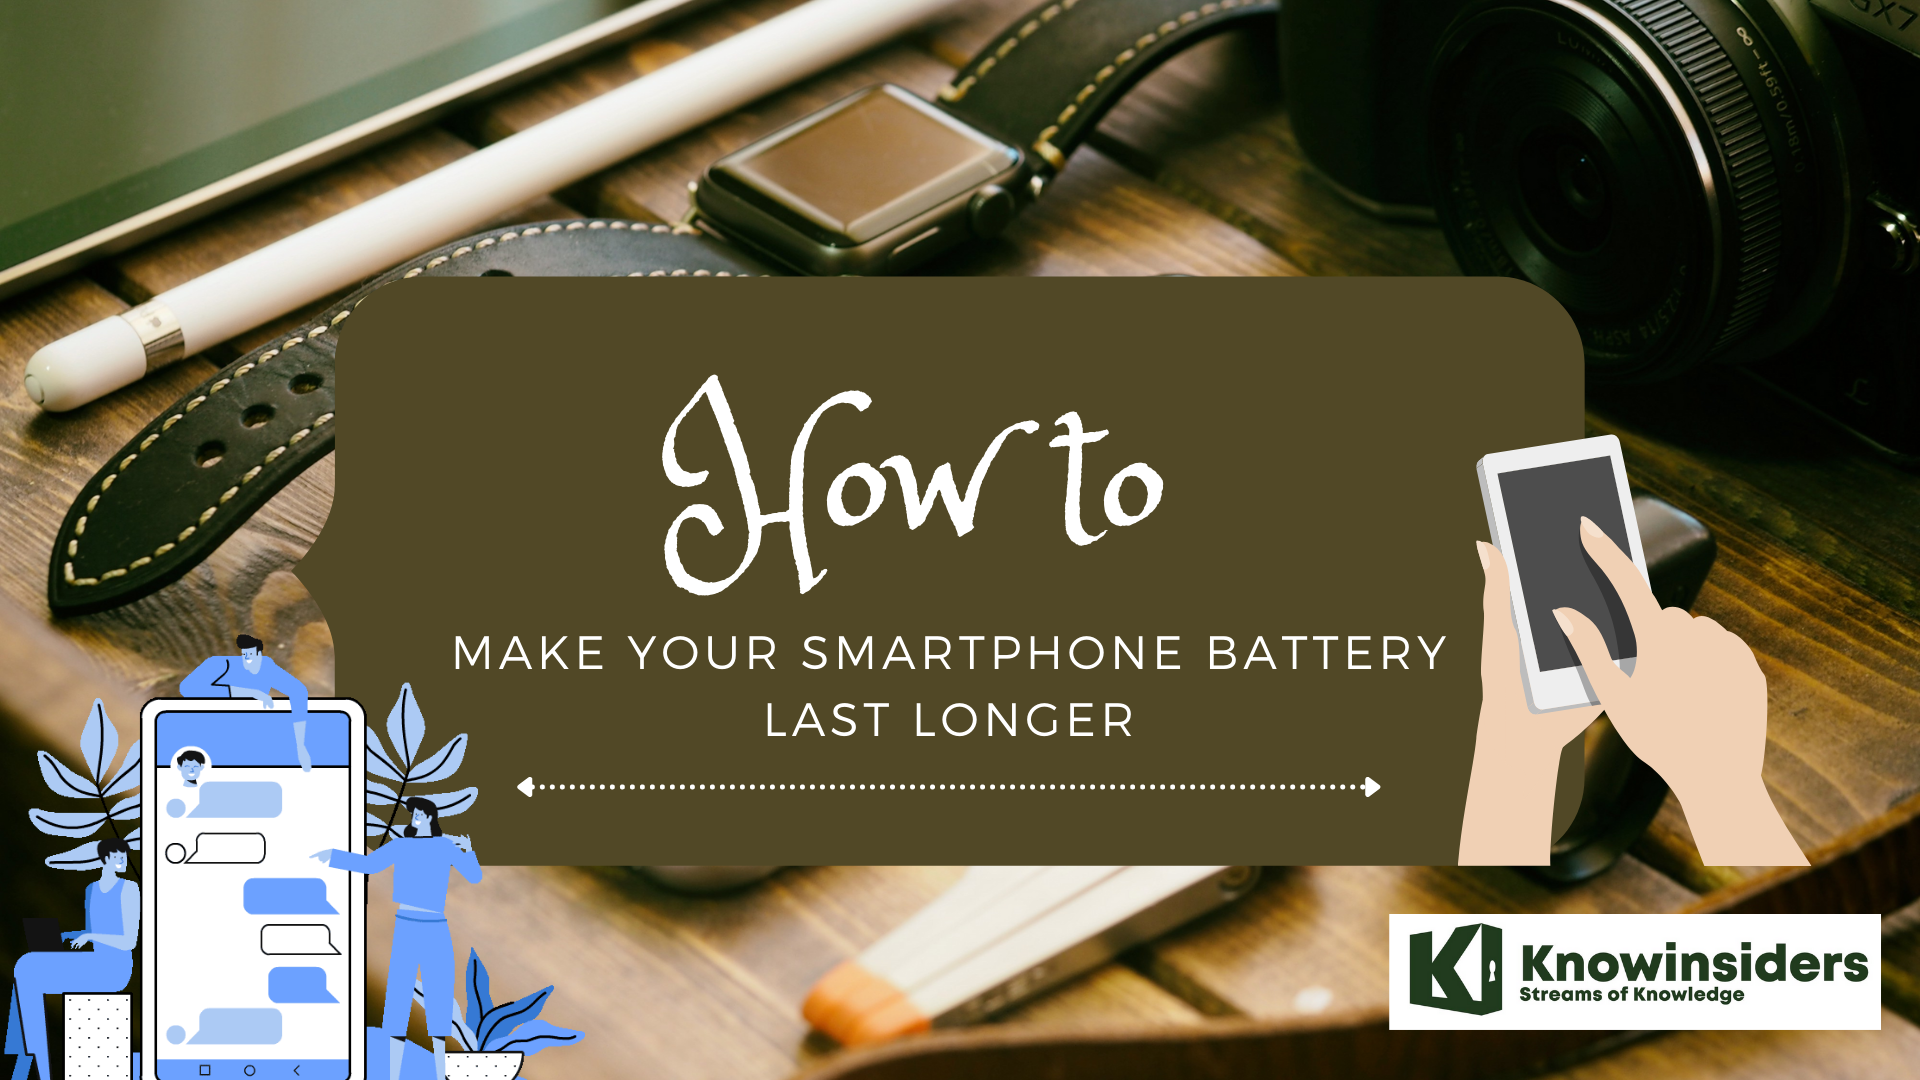 How To Make Your Smartphone Battery Last Longer: 10 Simple Tips to Try